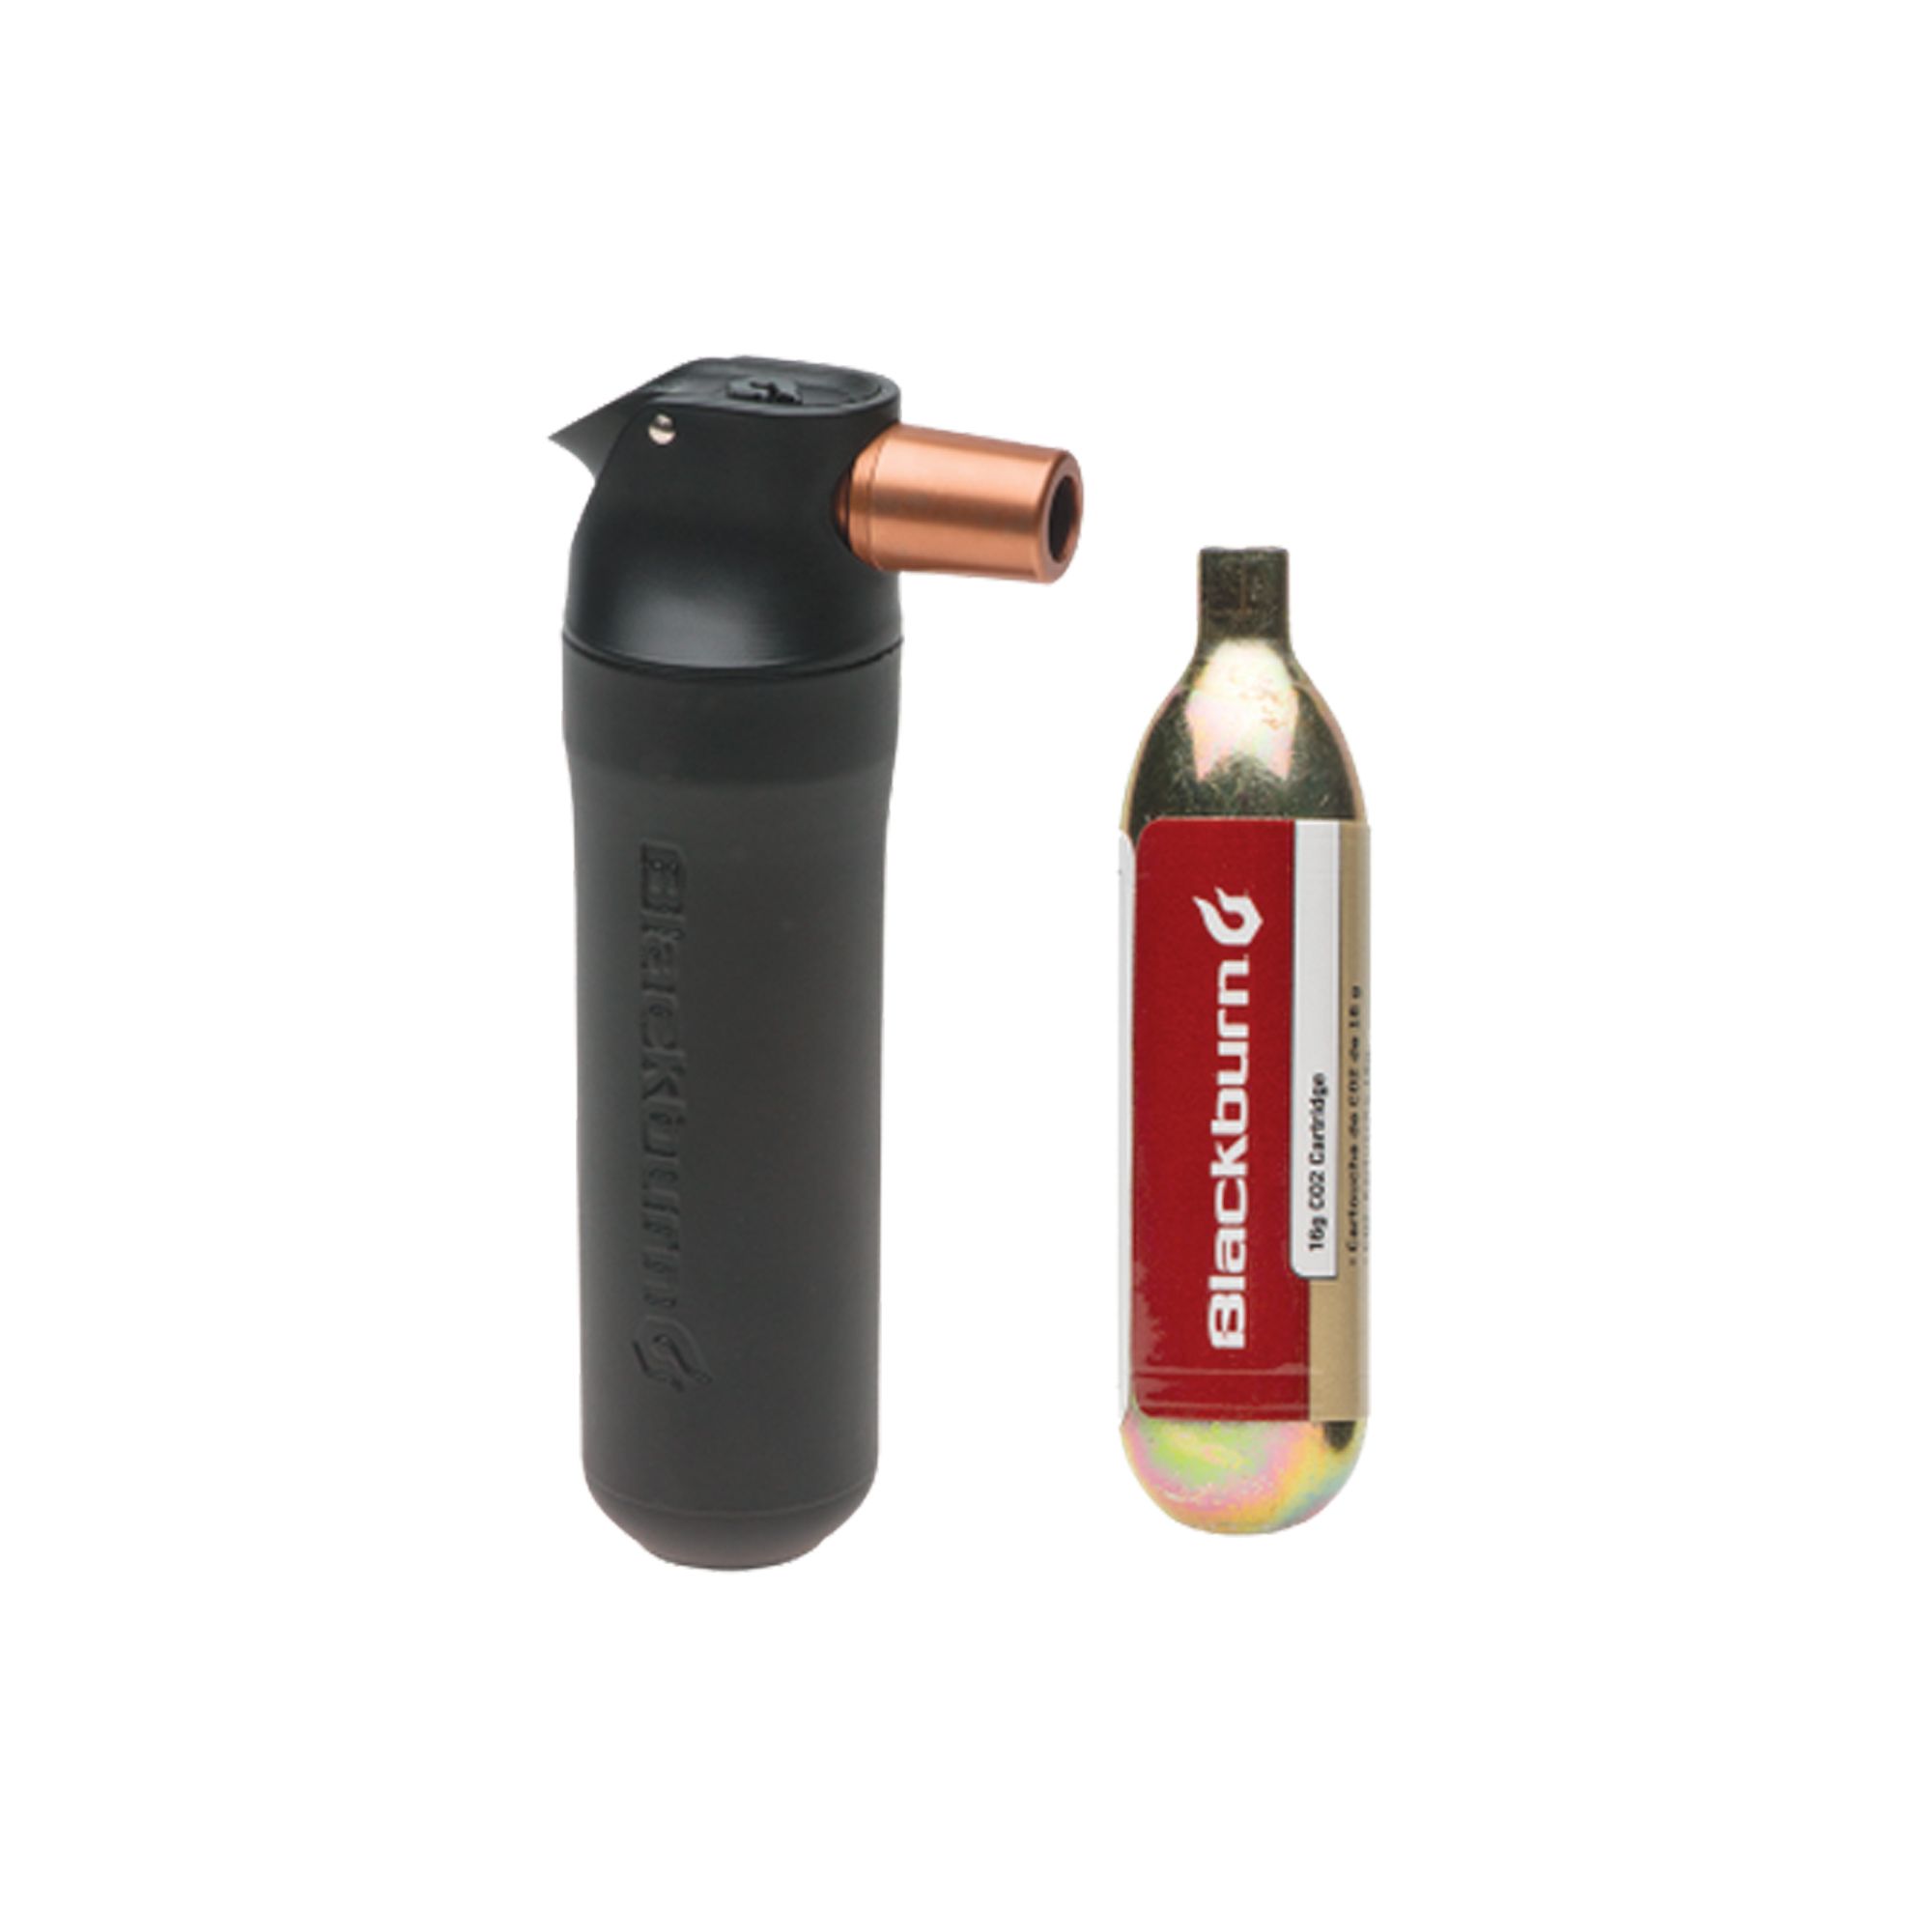 Outpost CO2 Cupped Inflator with Cartridge Blackburn